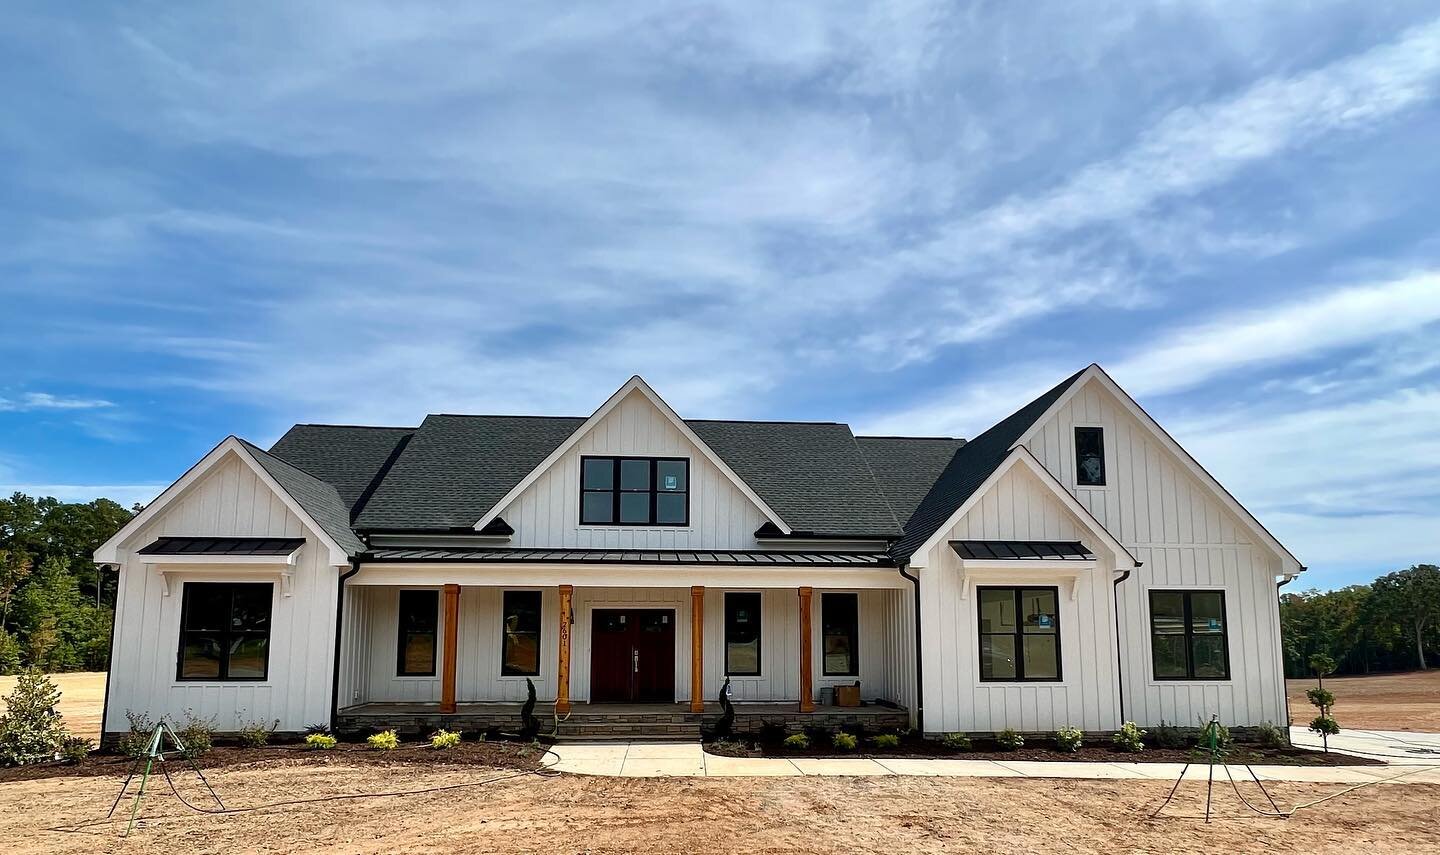 Check out the behind the scenes journey through this beautiful farmhouse home we recently completed! 🏡 ❤️#lovetheprocess

Follow us ➡️ @oconnelldeveloping
www.oconnelldeveloping.com

#customhome #customhomes #homebuilder #custombuilder #customhomesn